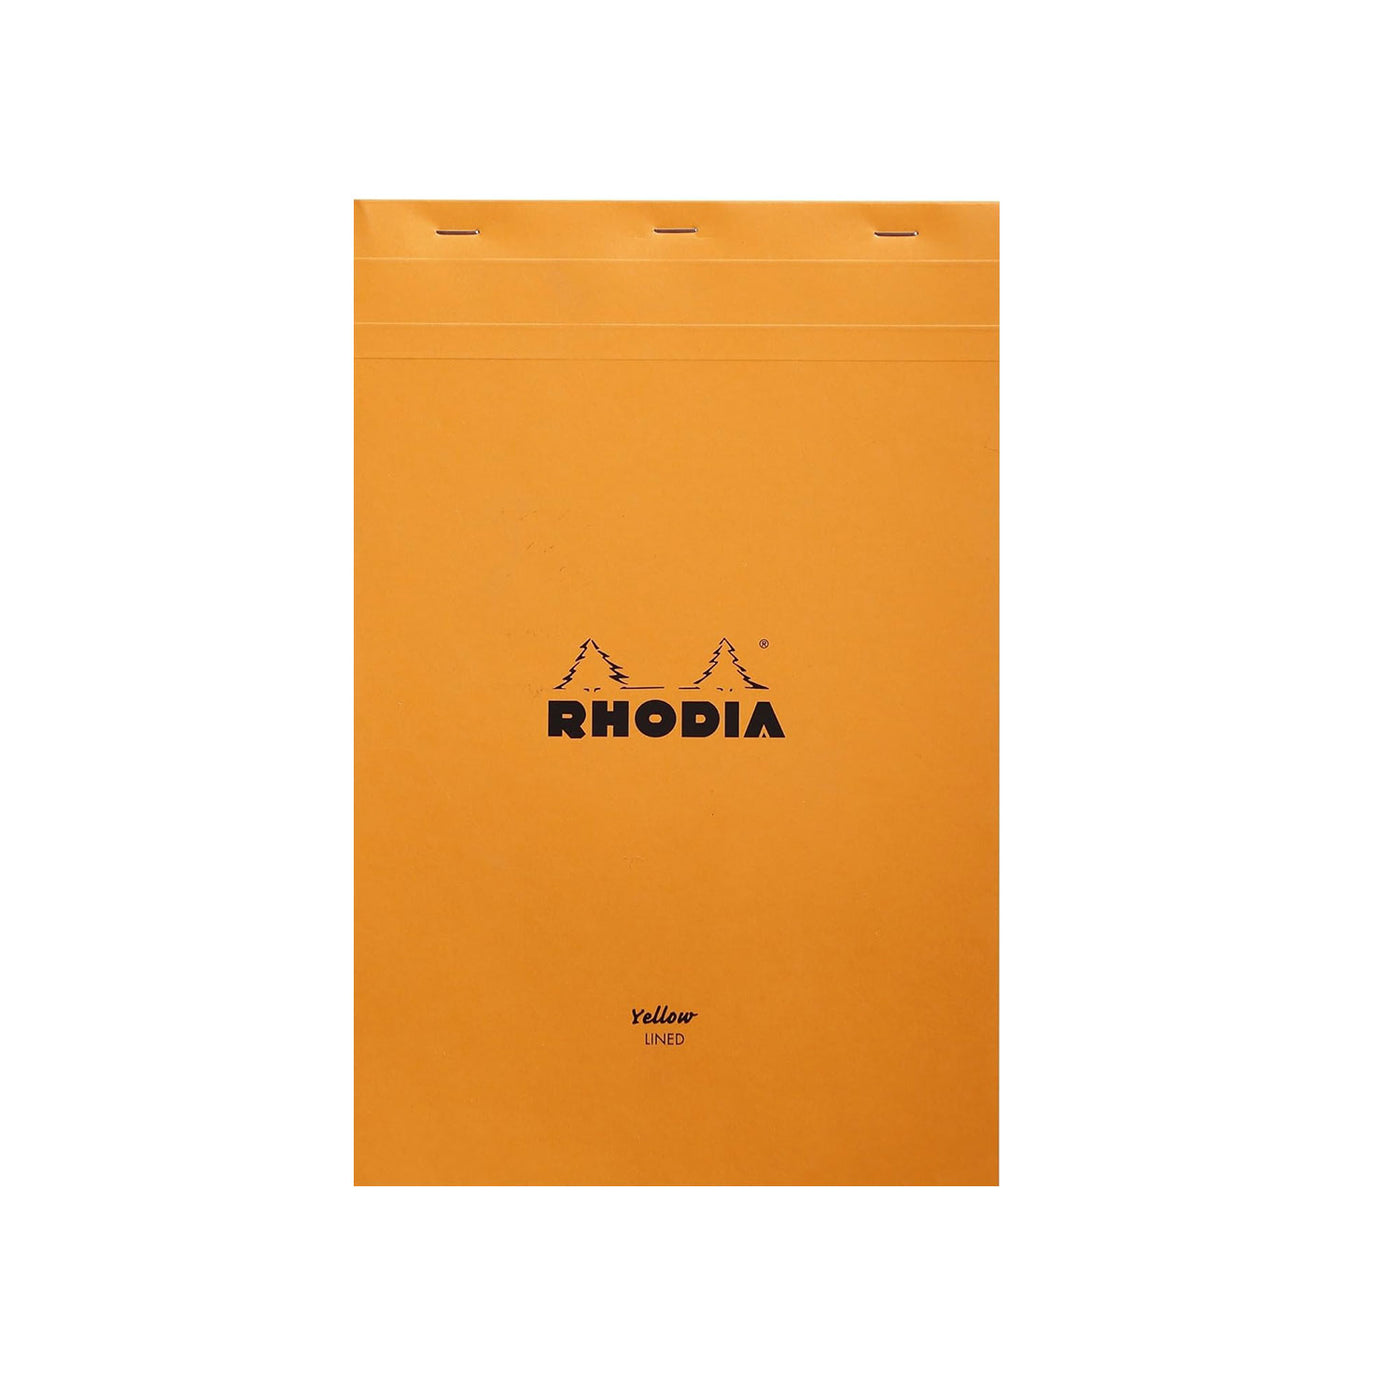 Rhodia No.19 Orange Notepad with Yellow Paper - A4+, Ruled 1